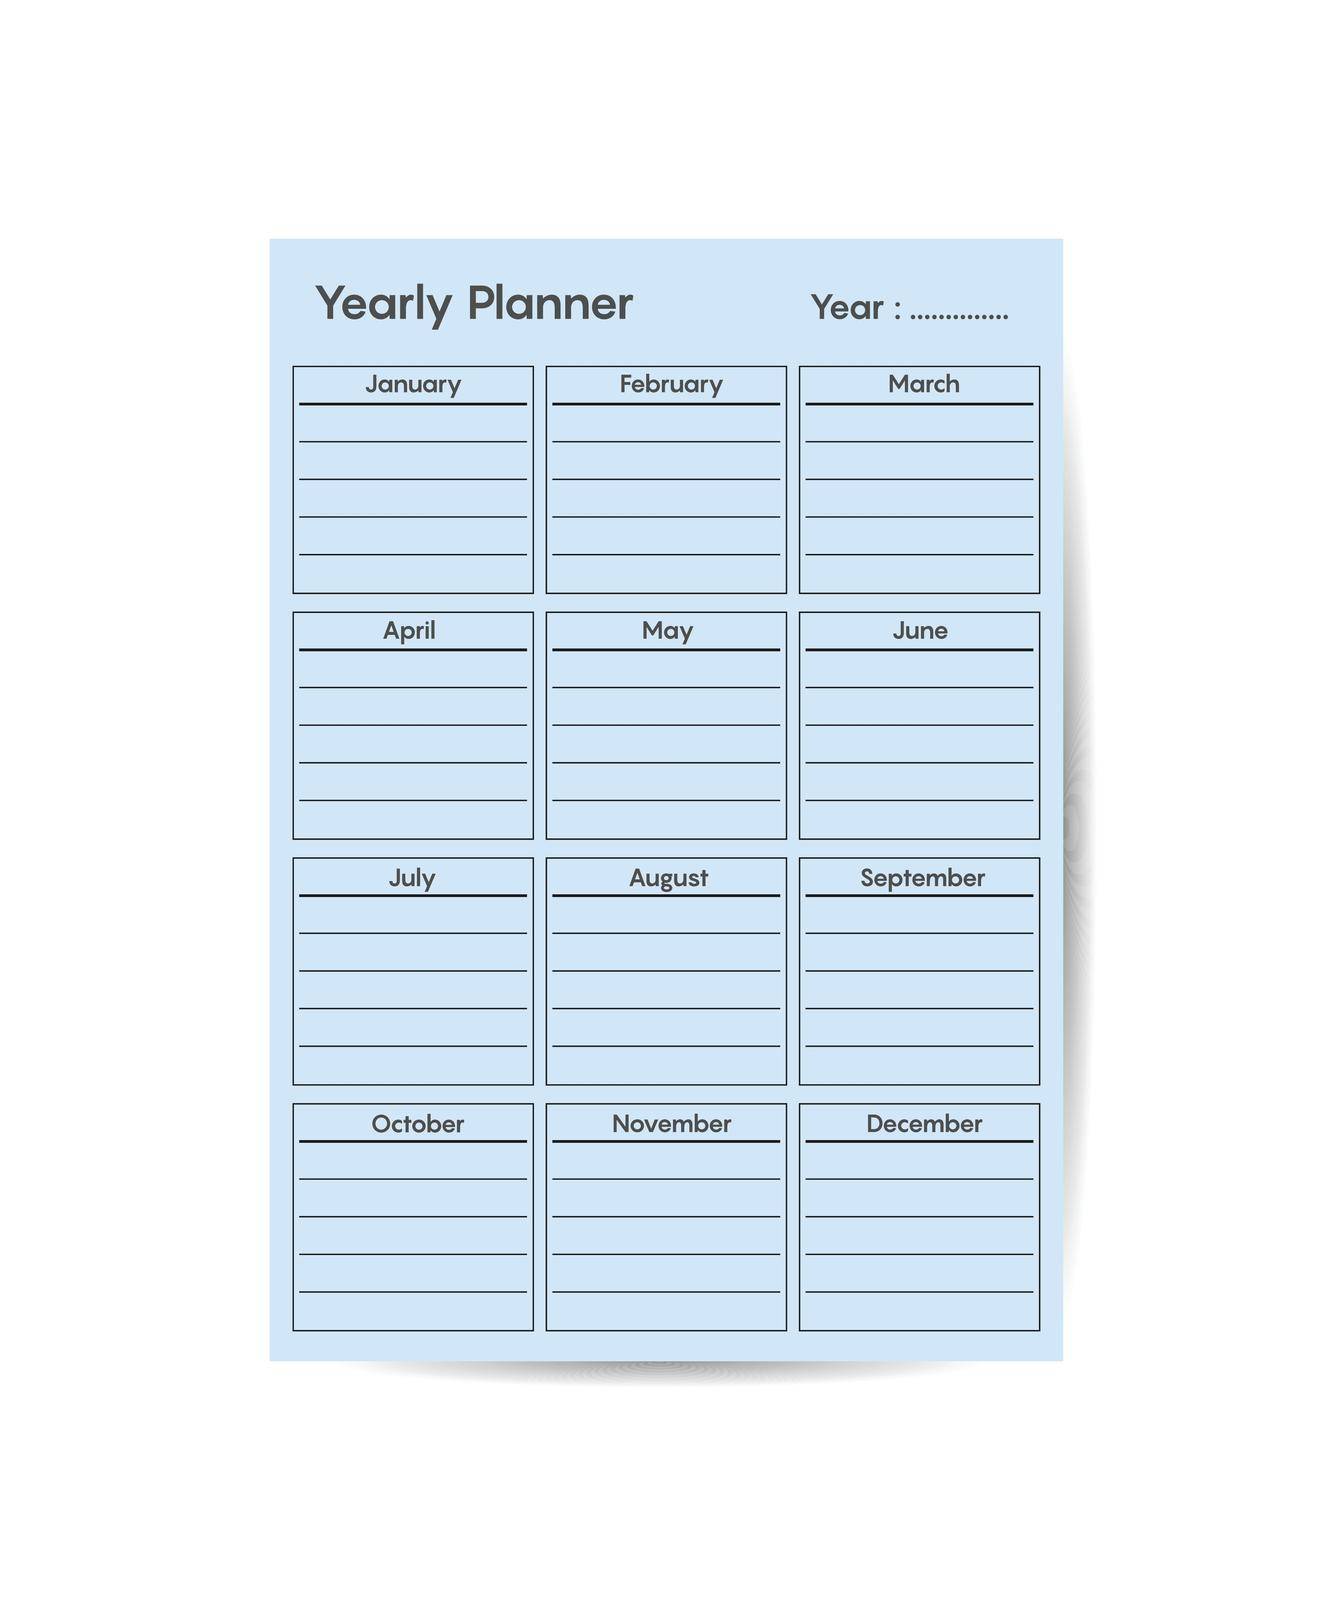 yearly planner template minimalist planners Business organizer page vector design by ANITA